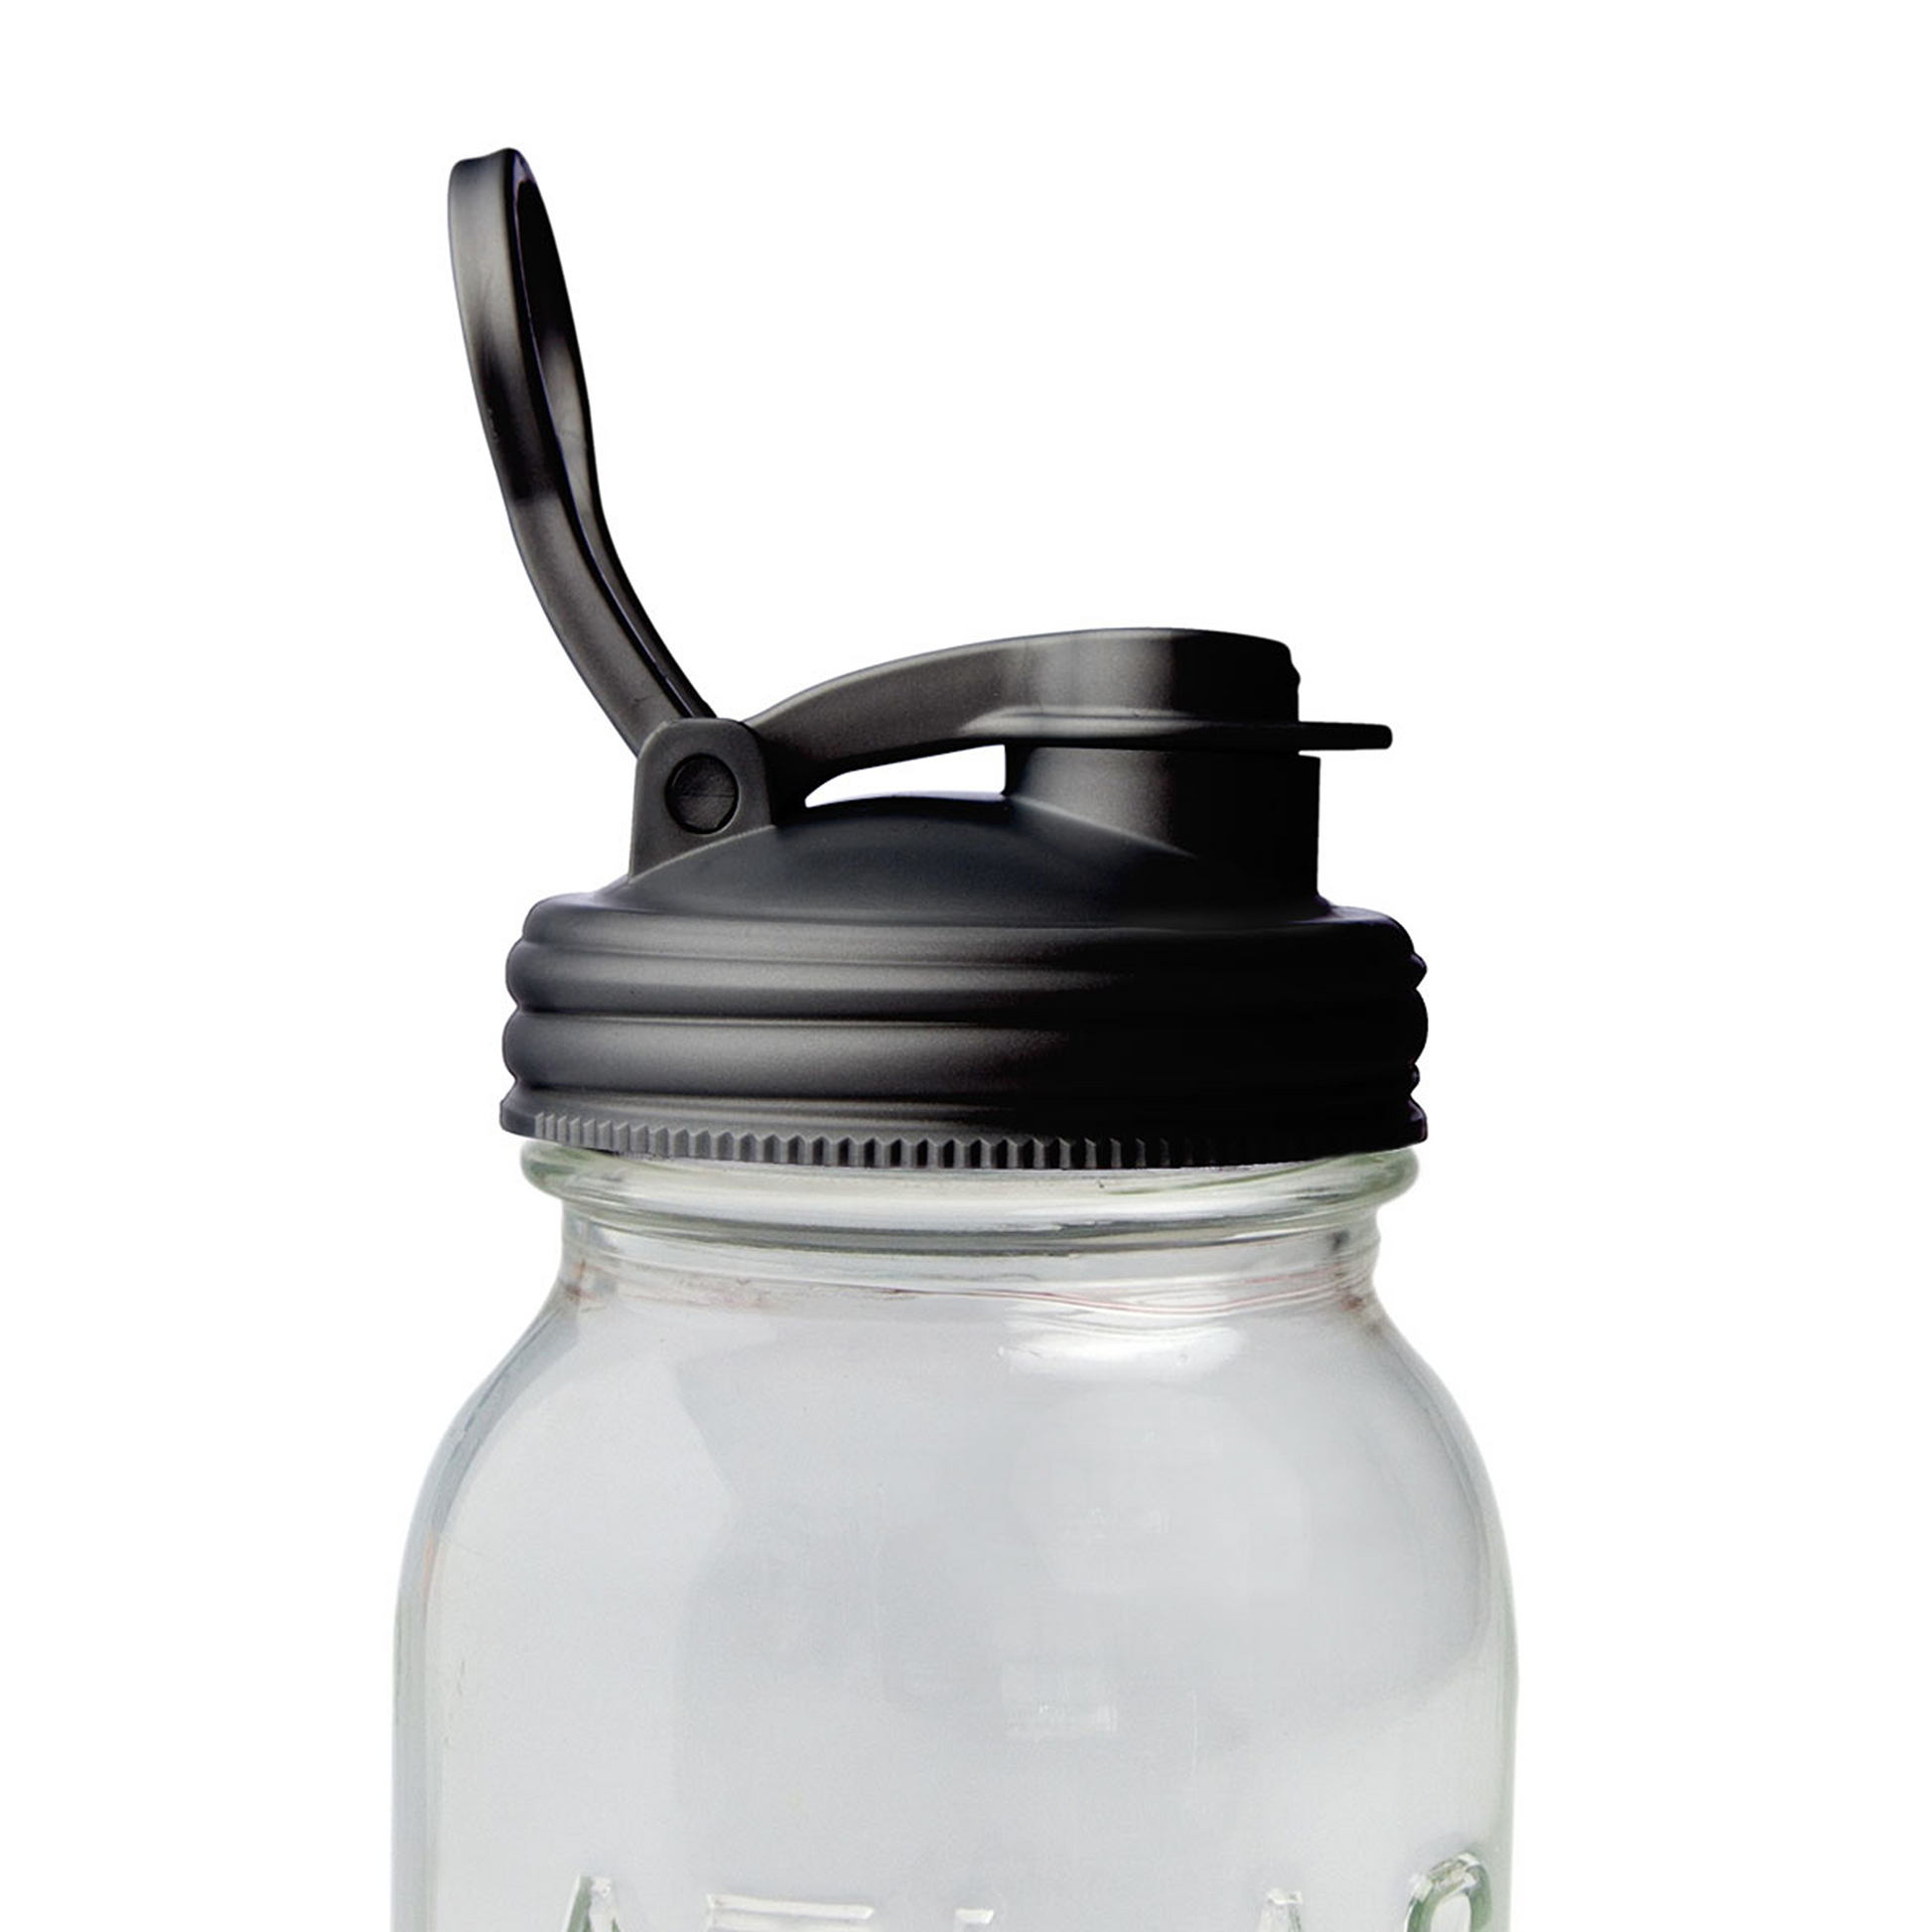 Our 24oz Mason Jar - What question do I get asked the most? – The